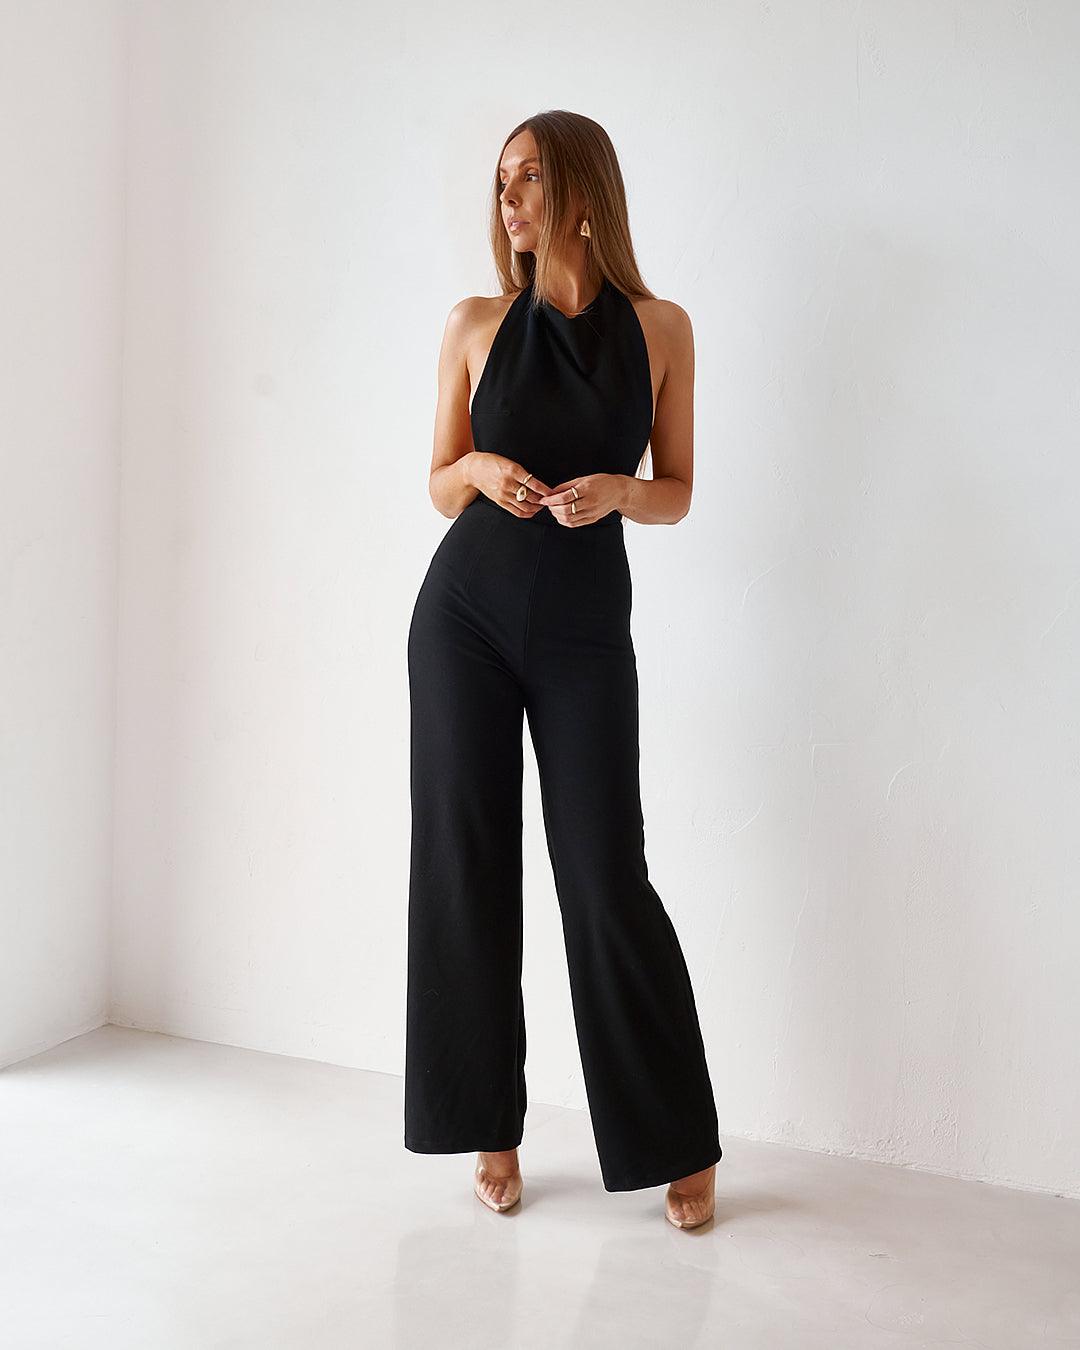 Backless Jumpsuit - Etsy